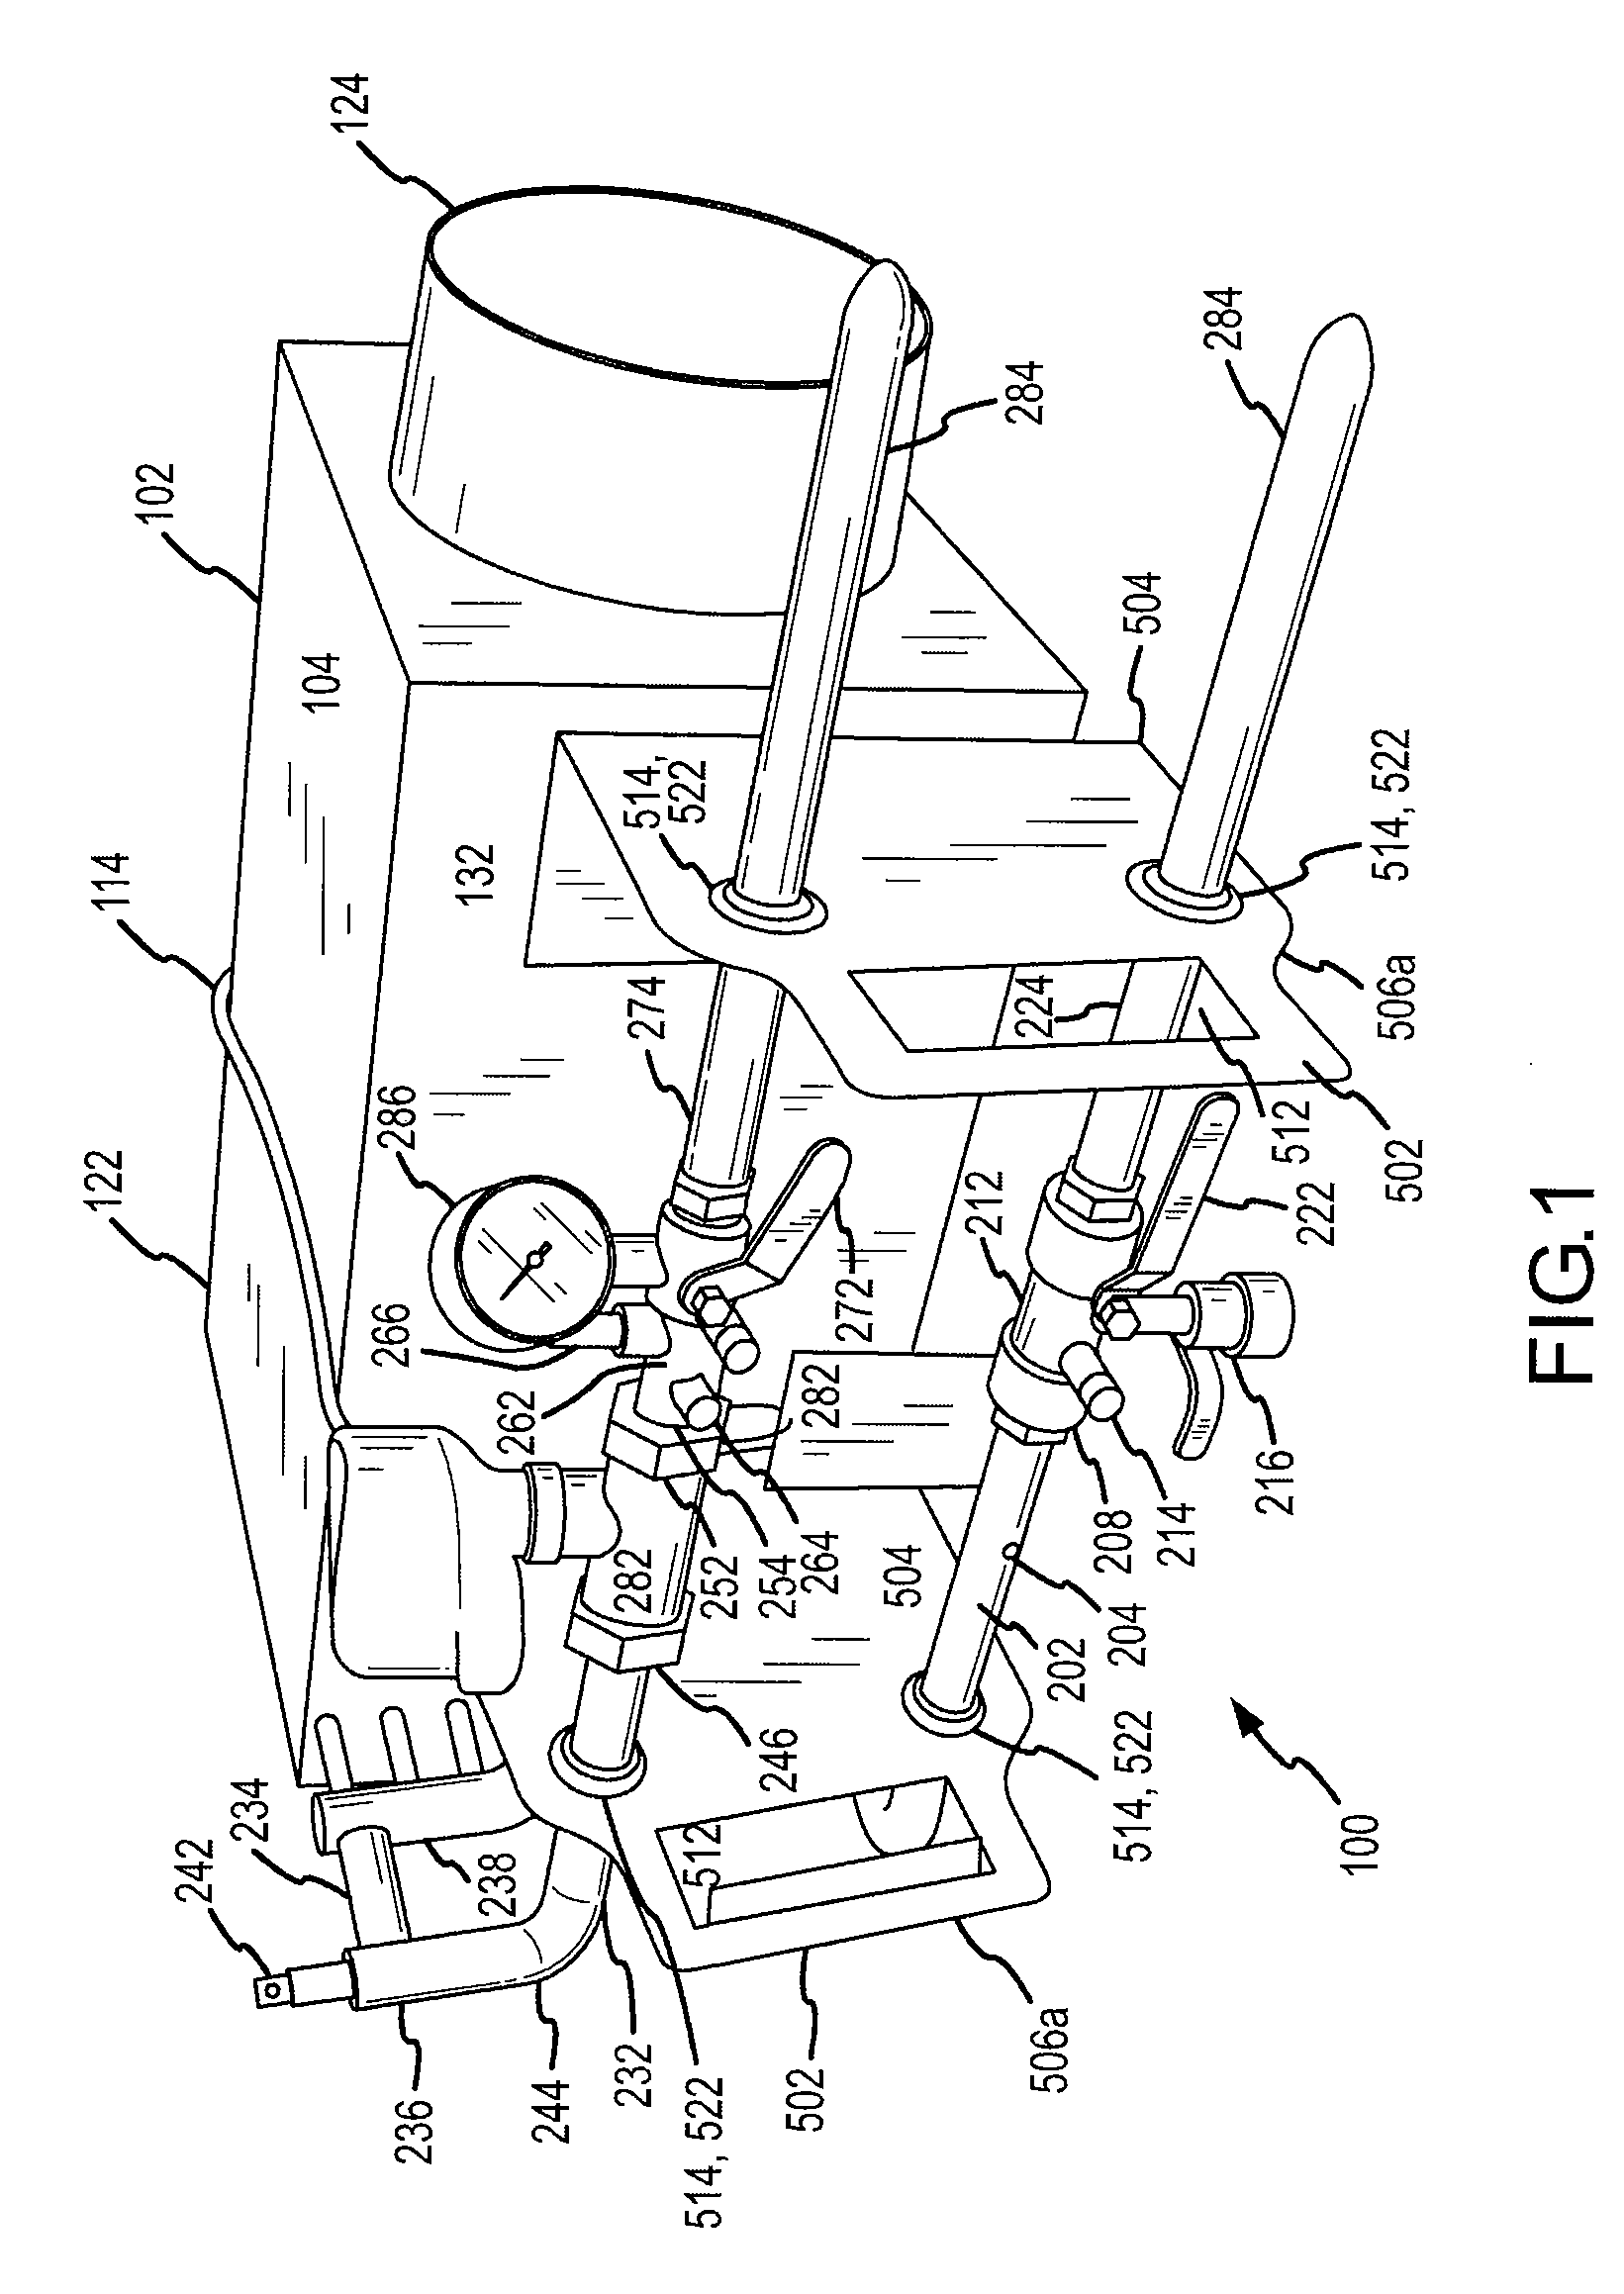 Embedded heat exchanger for heating, ventilatiion, and air conditioning (HVAC) systems and methods